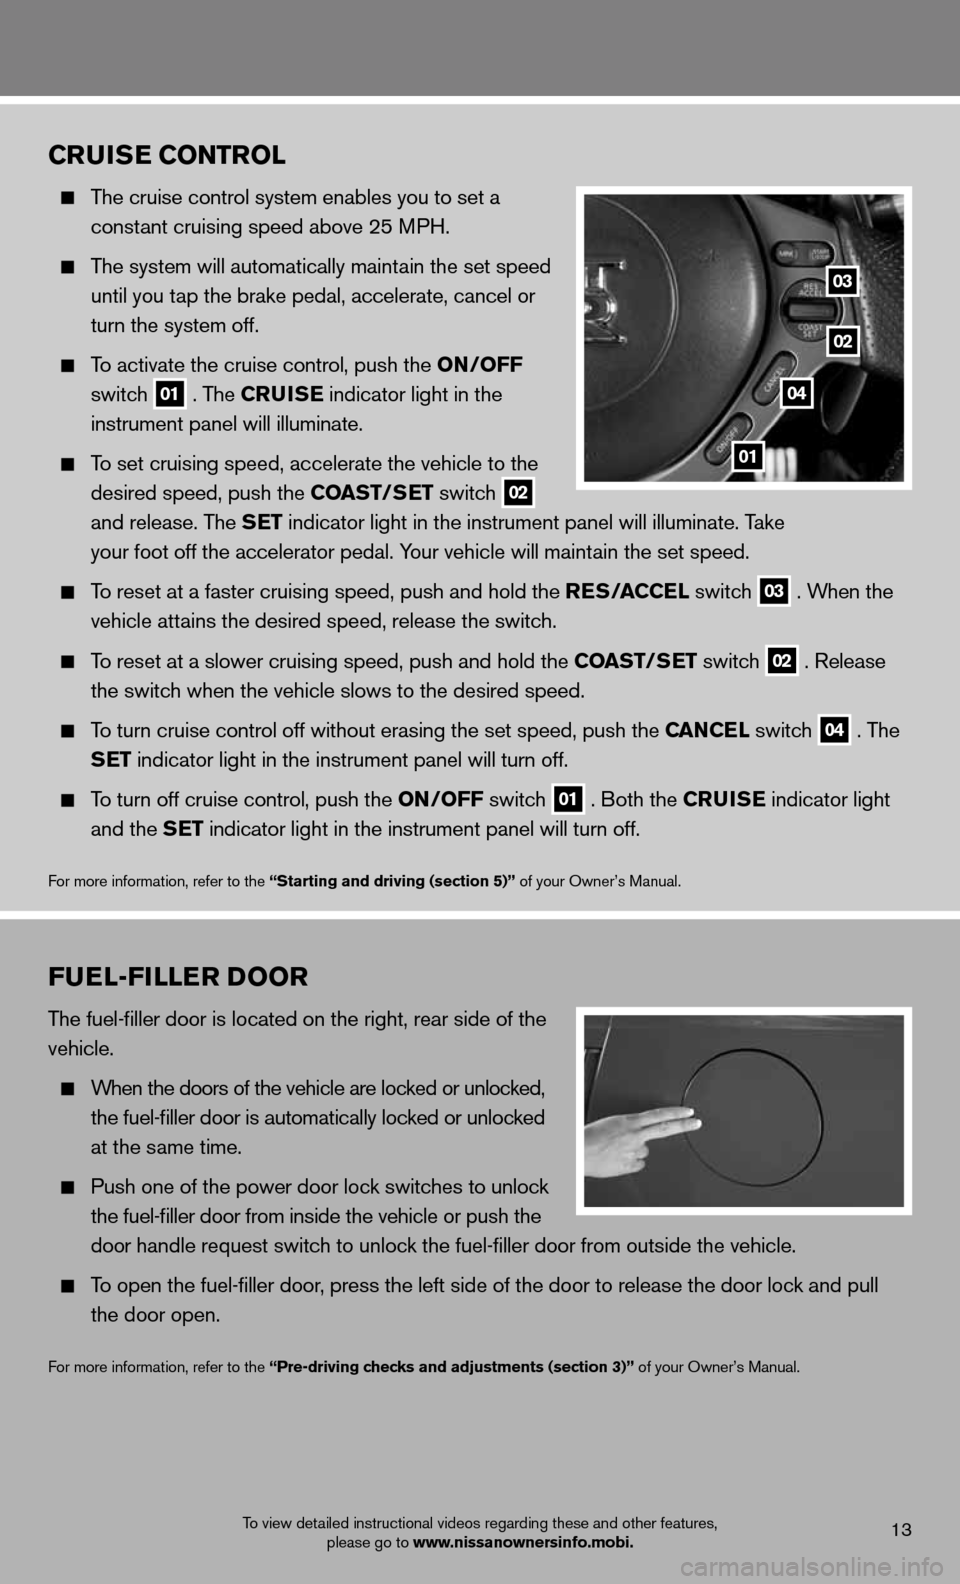 NISSAN GT-R 2013 R35 Quick Reference Guide cruiSe coNTrol
   The cruise control system enables you to set a   
    constant cruising speed above 25 MPH.   
 
  The system will automatically maintain the set speed   
    until you tap the brake